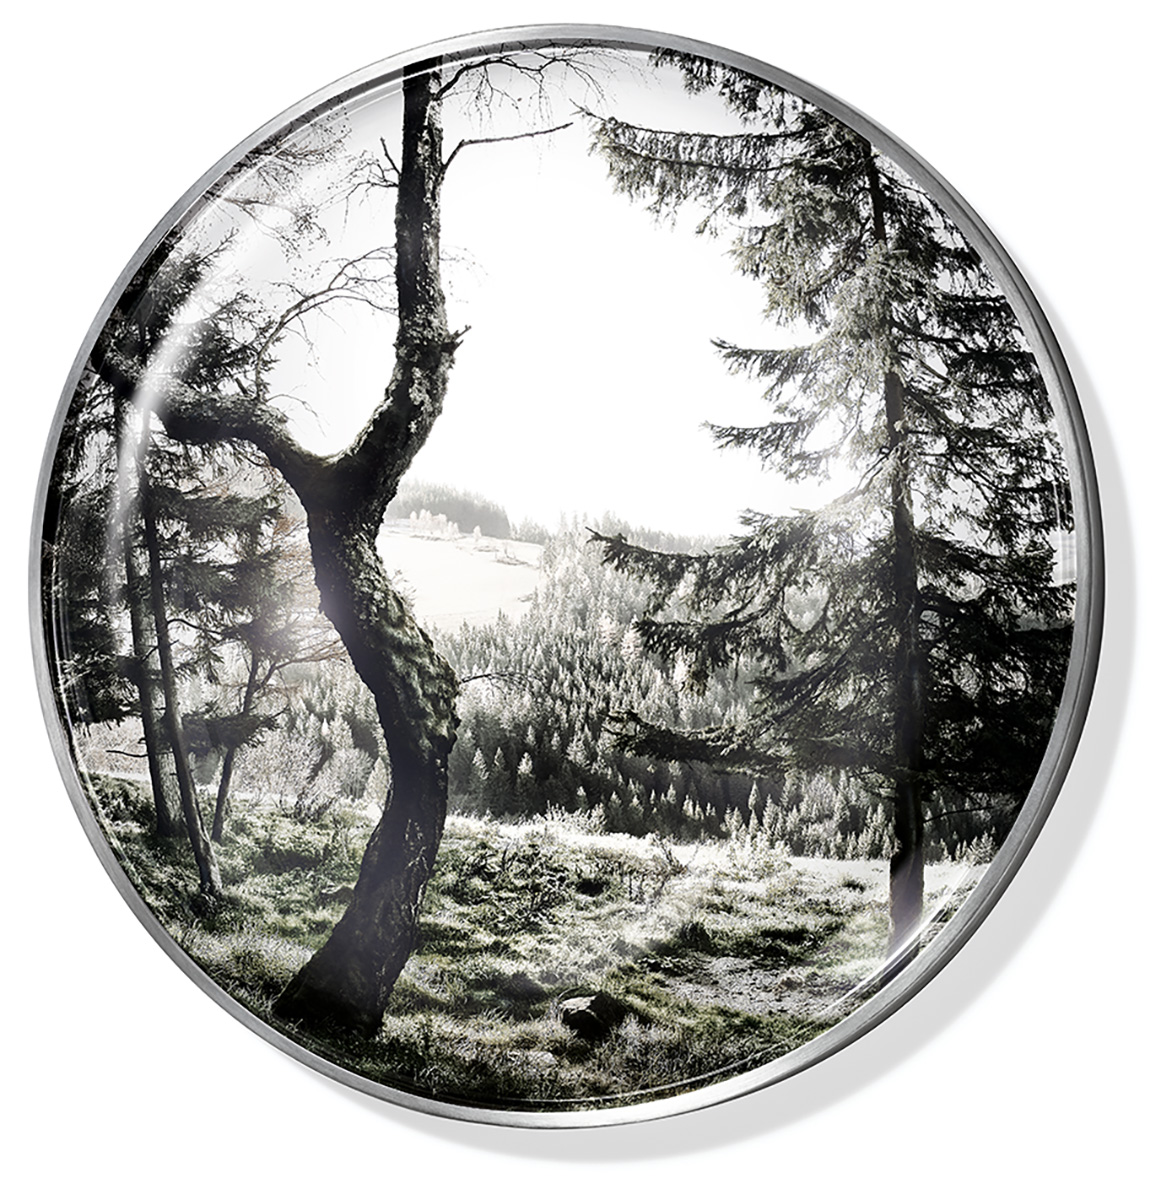 Trophy 03, 2013ø = 26 cmPhotography, pigment print on Iridium Silver Gloss paperbehind glass lens, framed with steel panelEdition: 5